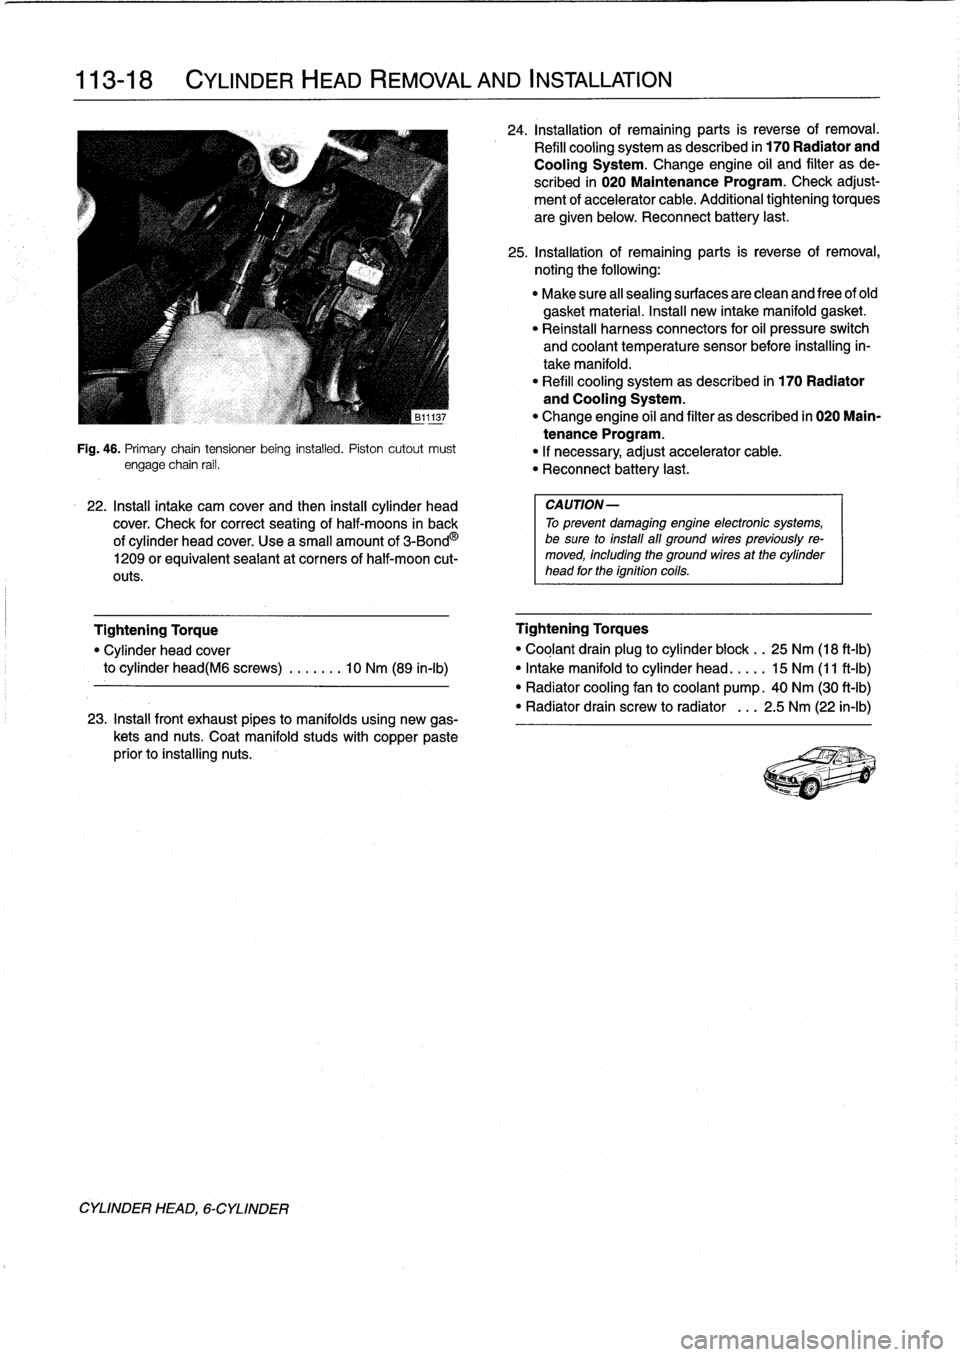 BMW 318i 1997 E36 Owners Manual 
113-
1
8

	

CYLINDER
HEAD
REMOVAL
AND
INSTALLATION

CYLINDER
HEAD,
6-CYLINDER

Fig
.
46
.
Primary
chaintensioner
being
installed
.
Piston
cutout
must
engage
chain
rail
.

22
.
Install
intake
cam
cov